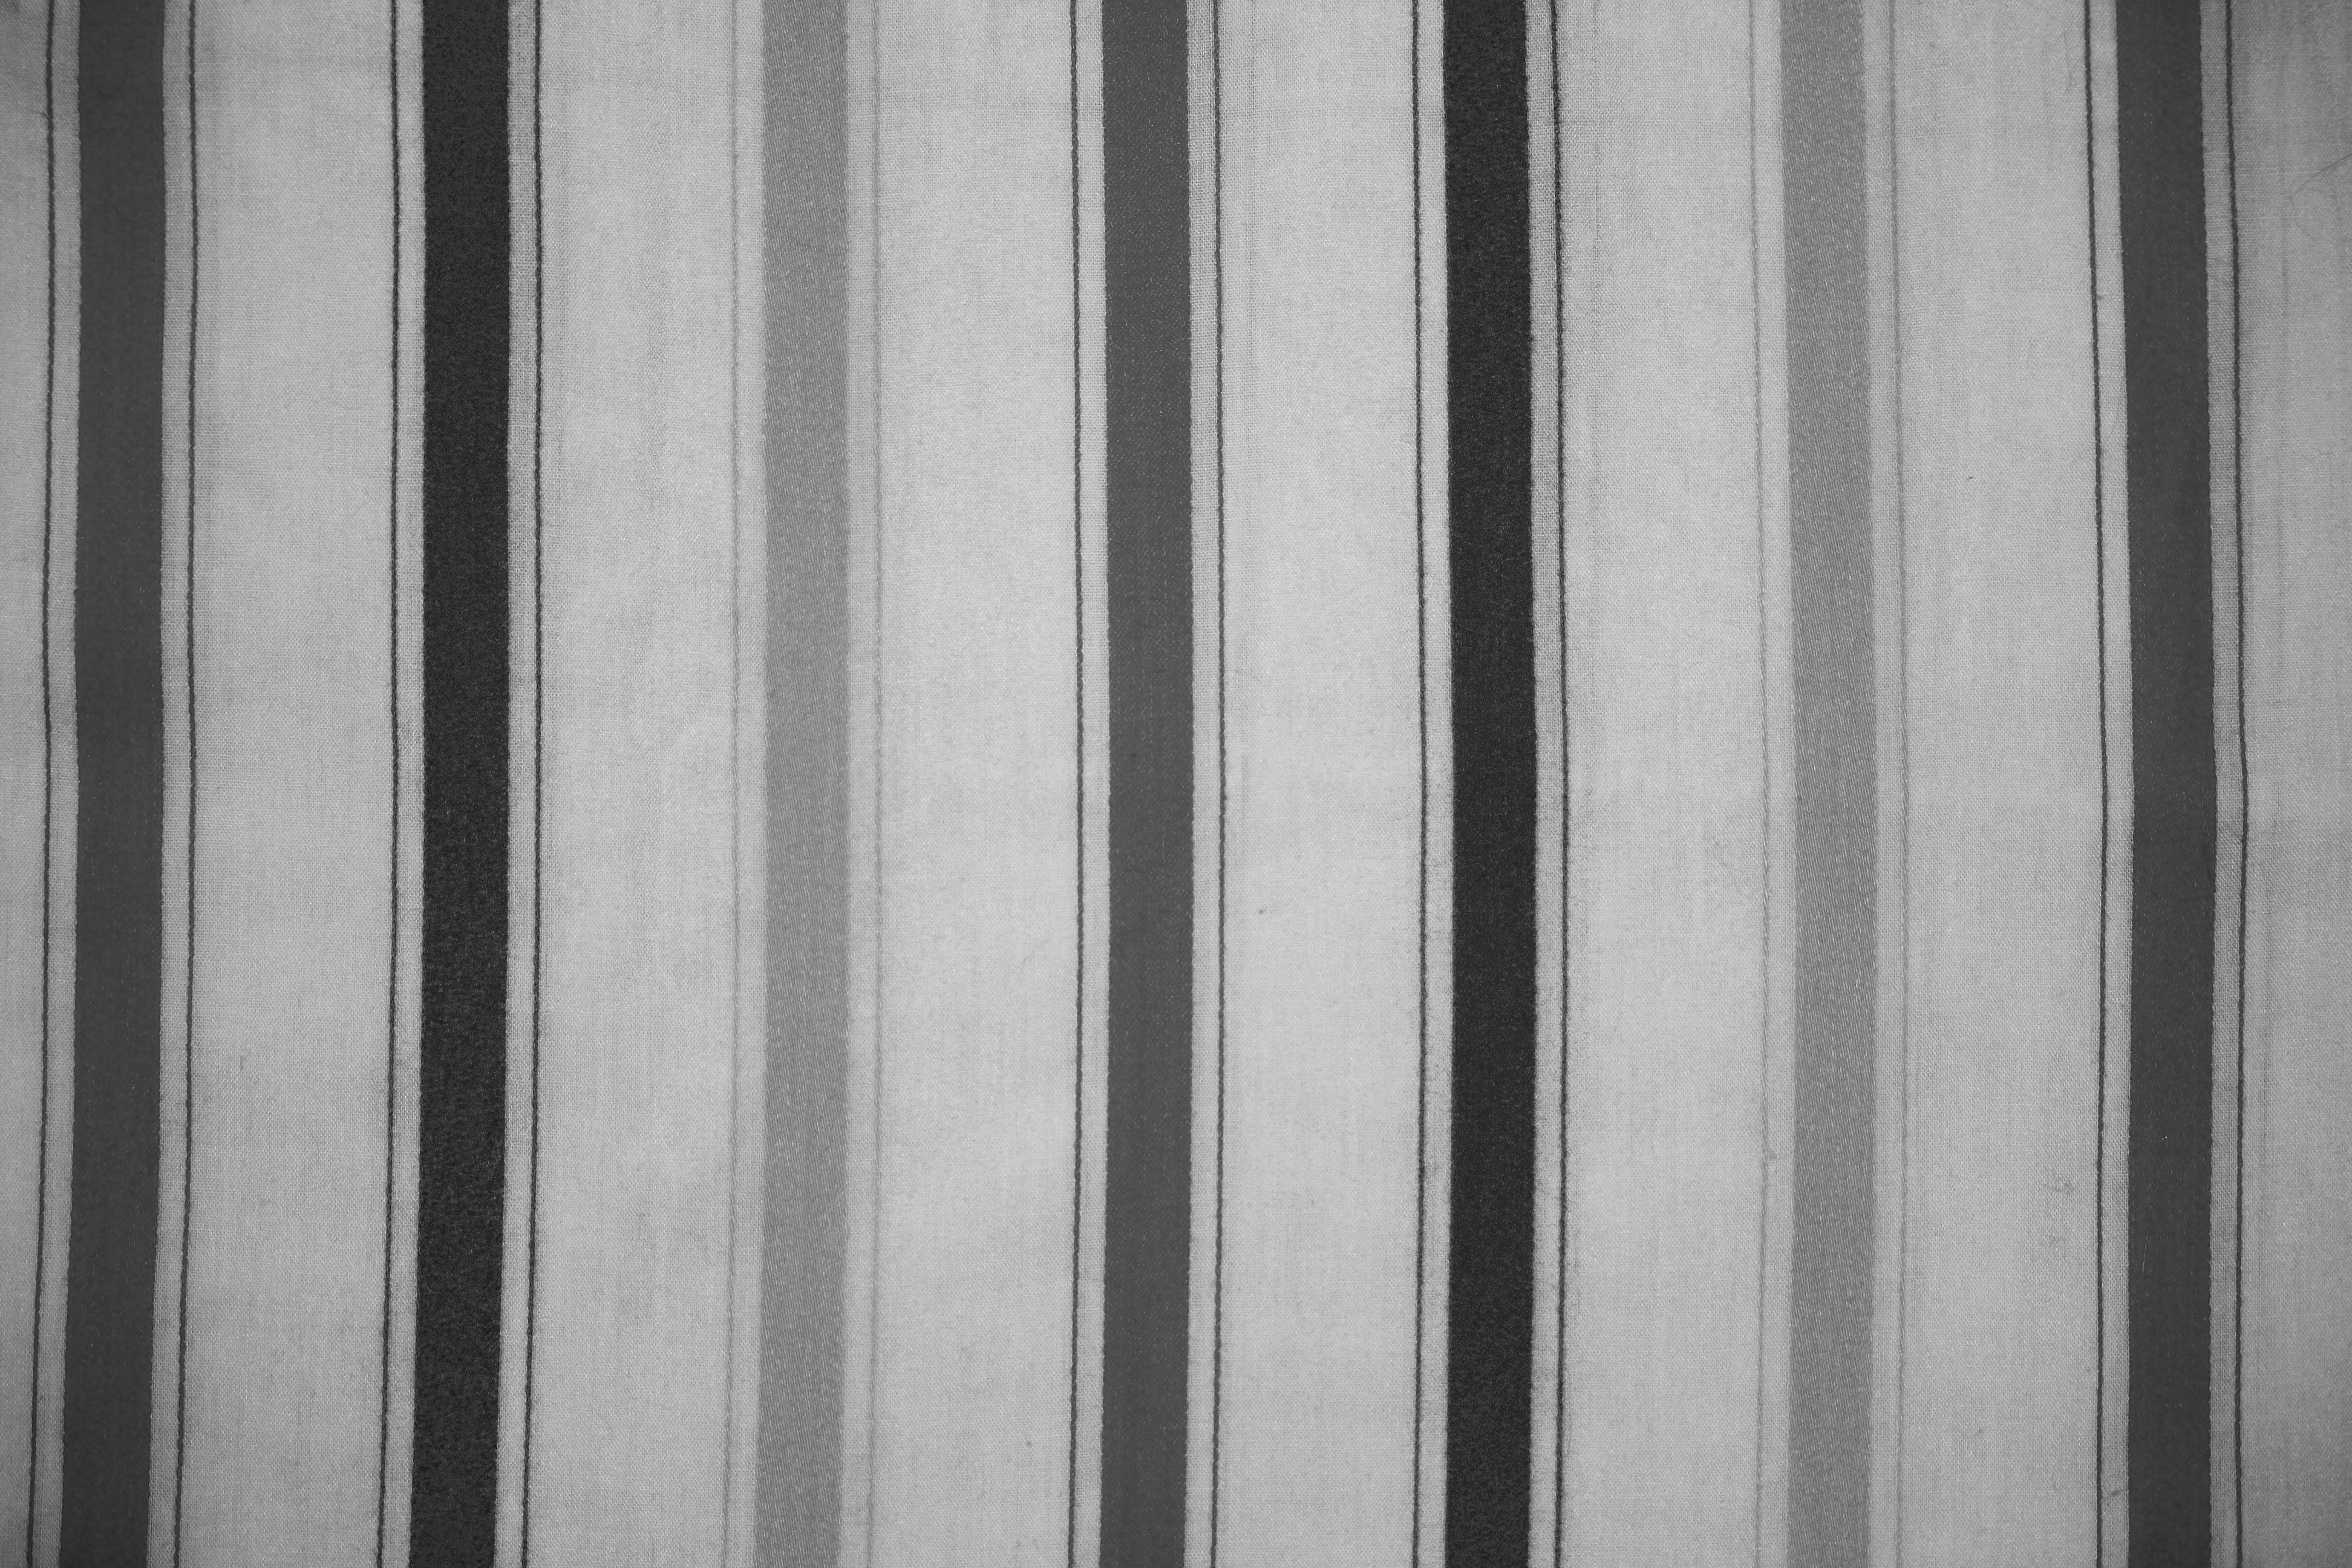 Striped Fabric Texture Gray On White High Resolution Photo